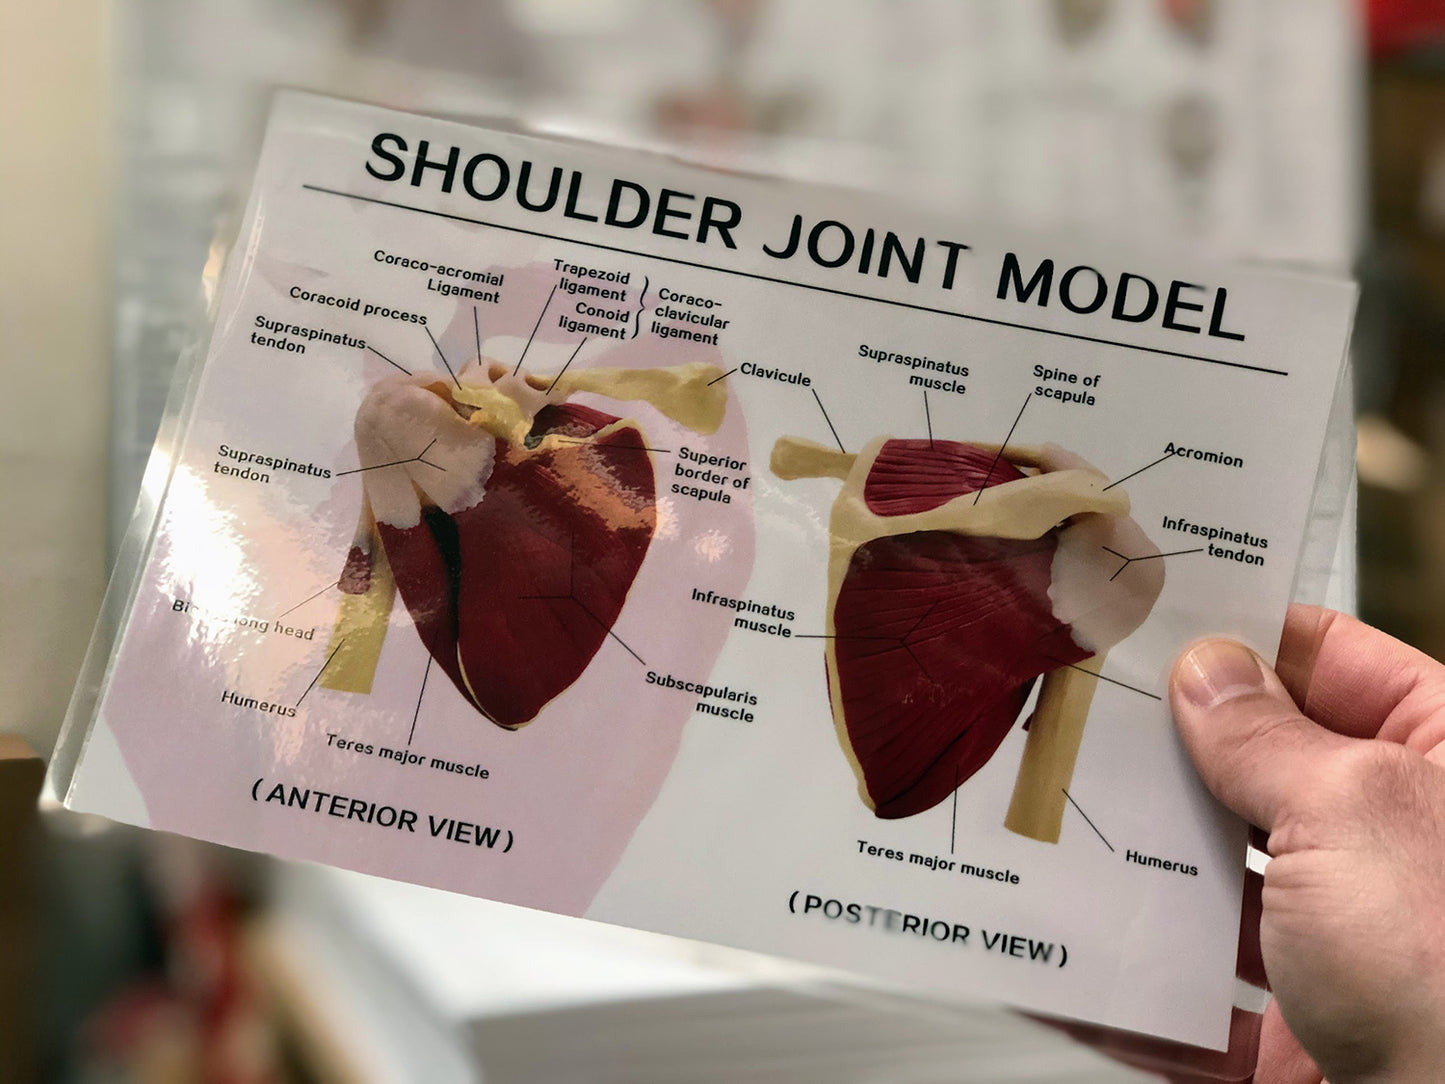 Shoulder model with muscles and ligaments incl. list with Latin names